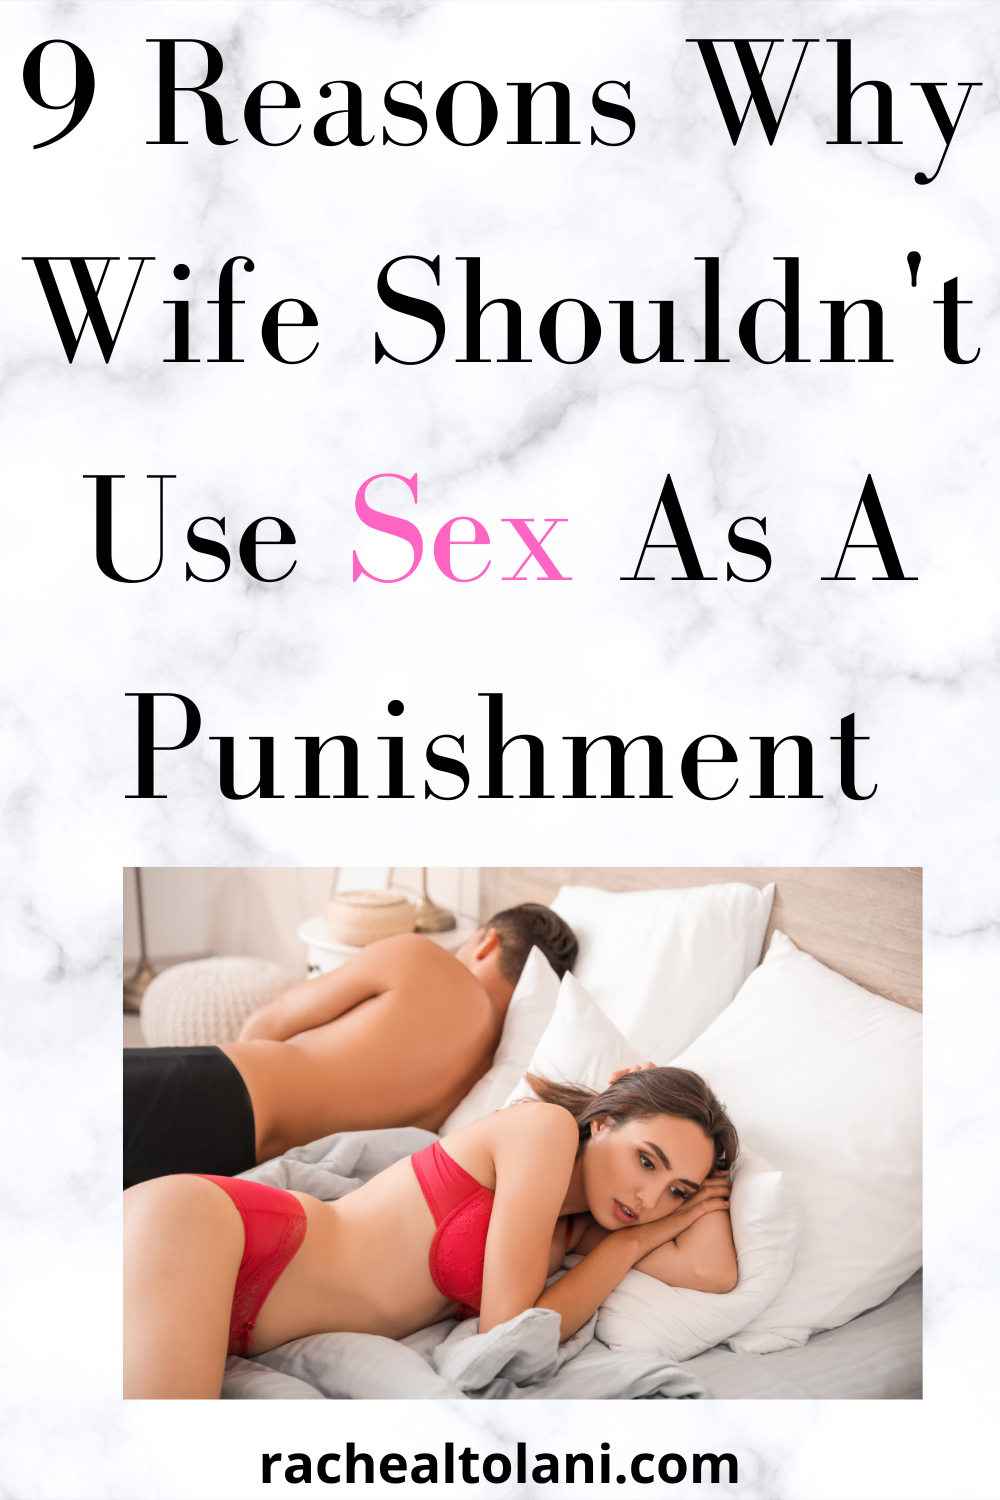 Why Wife Shouldn't Use Sex As A Punishment